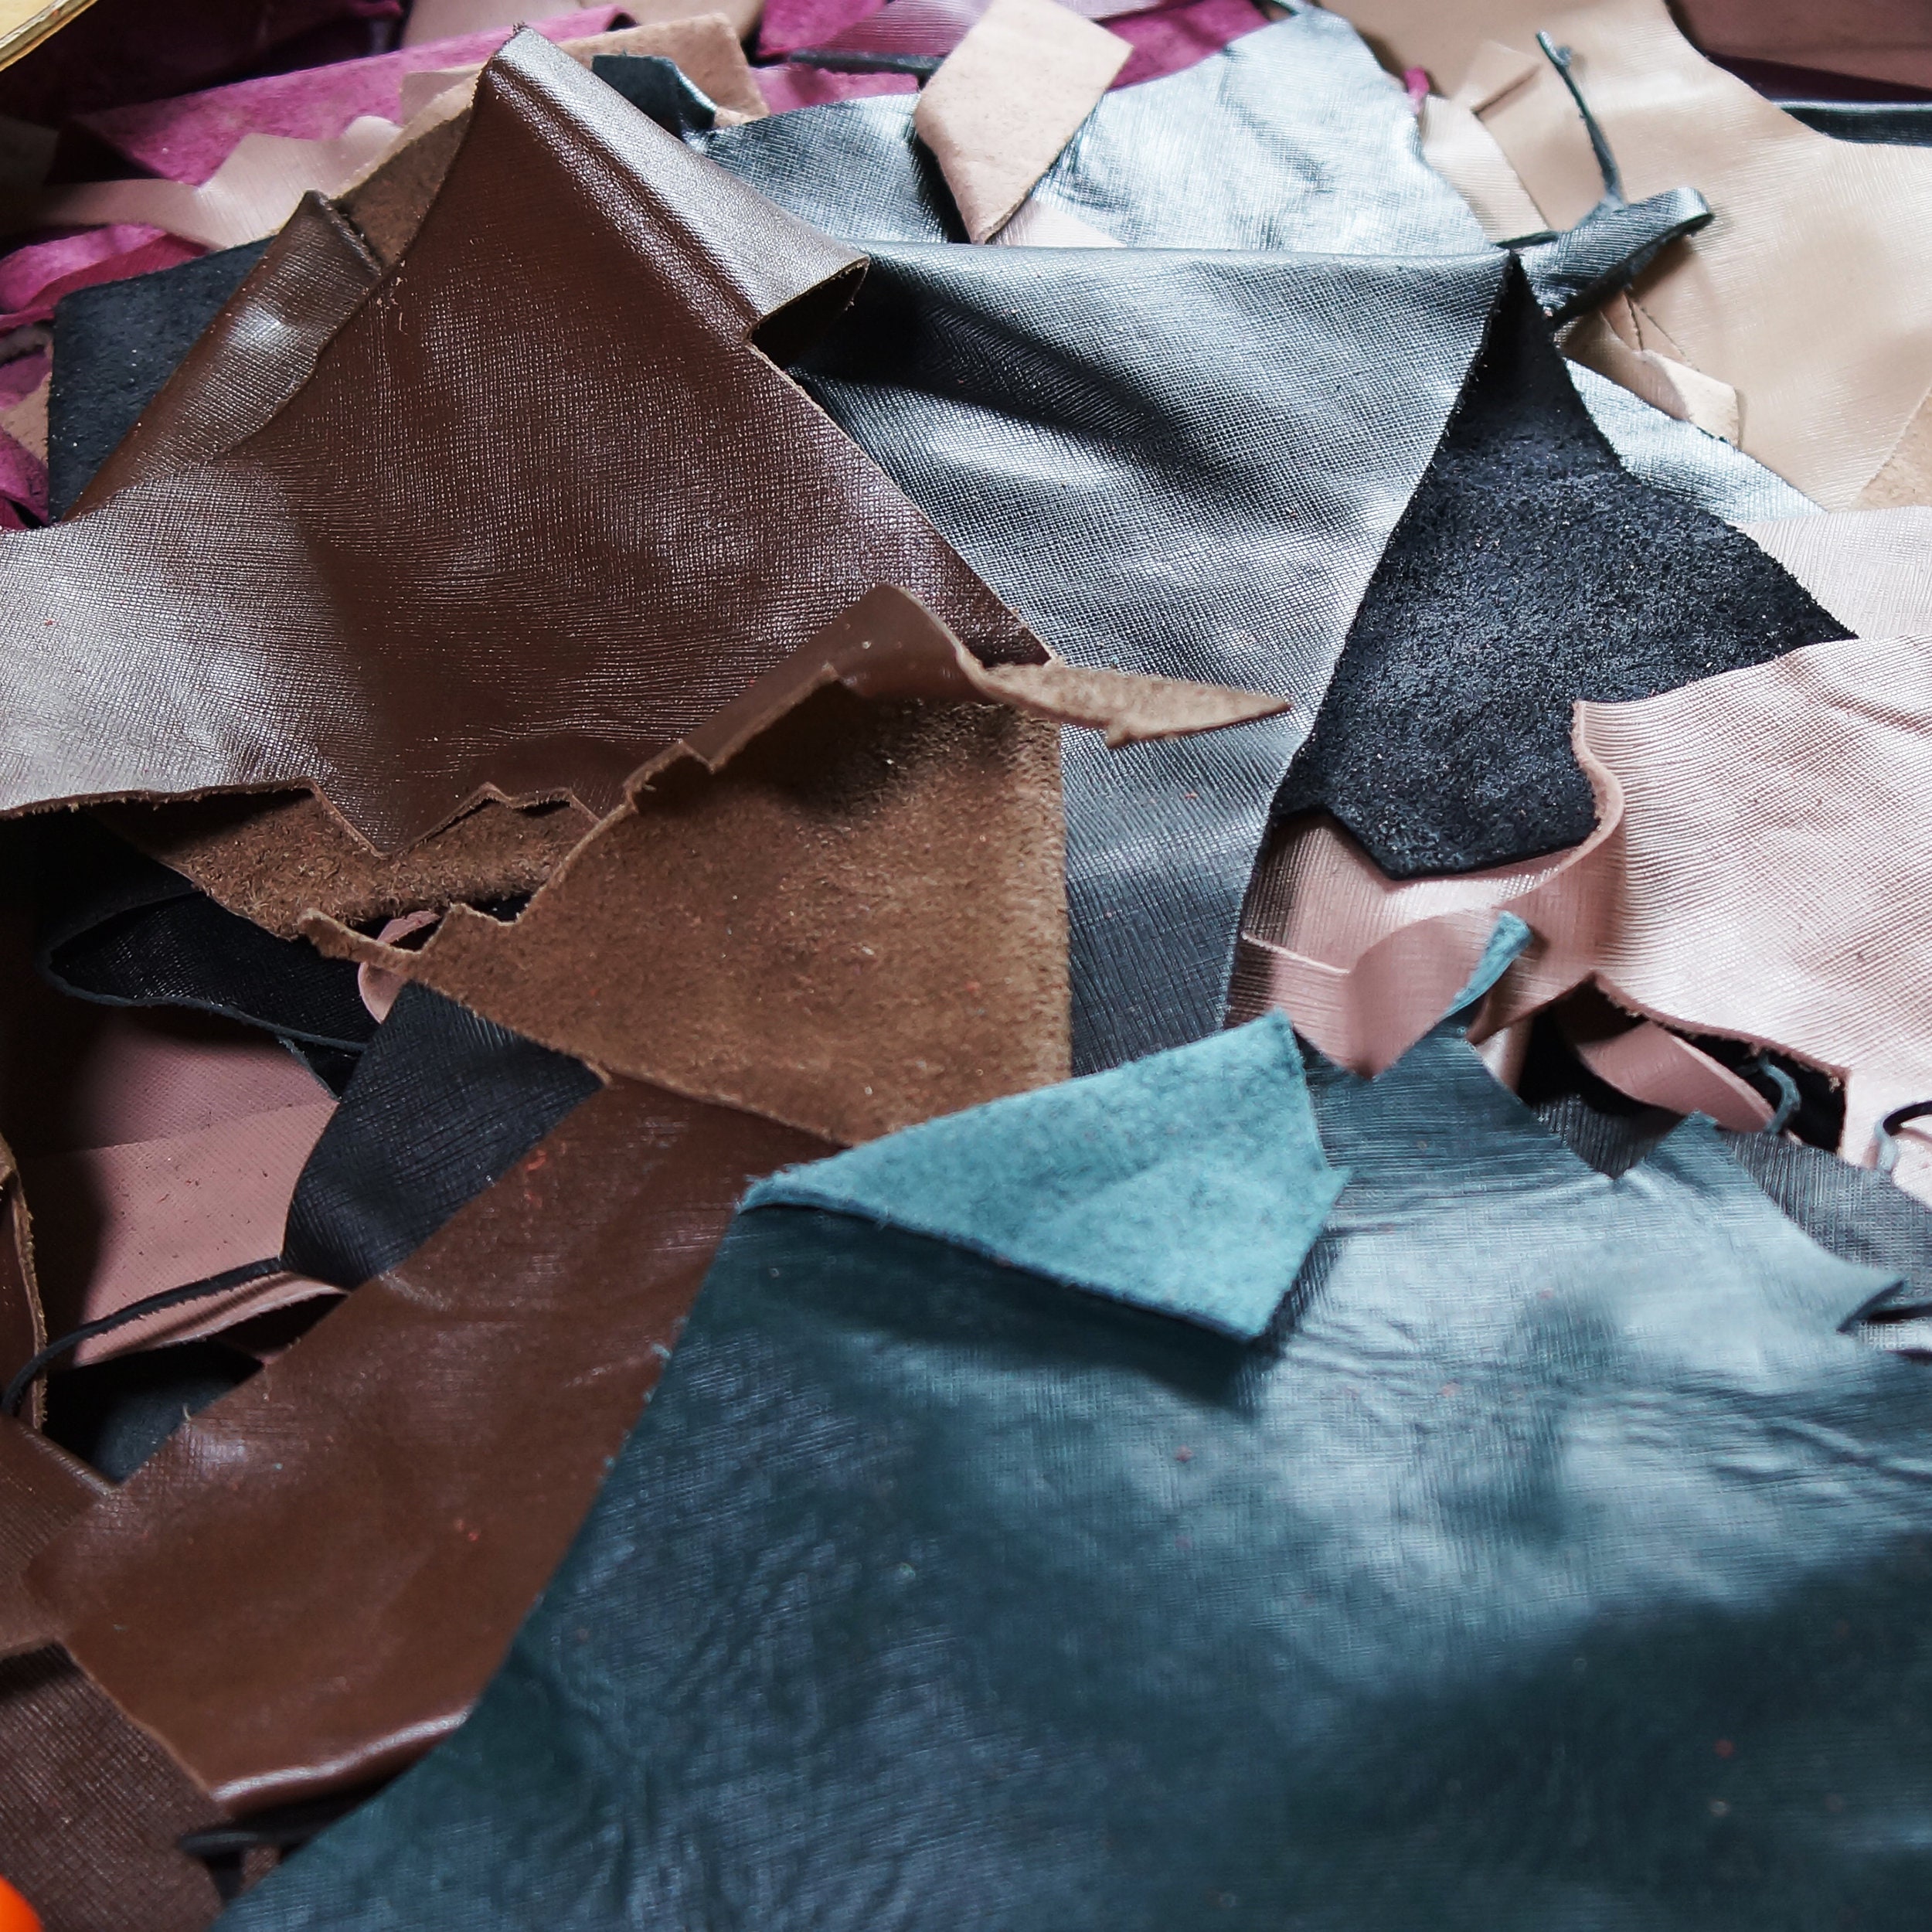 Leather Scraps, Leather Remnants, 2 lbs, Assorted Leather